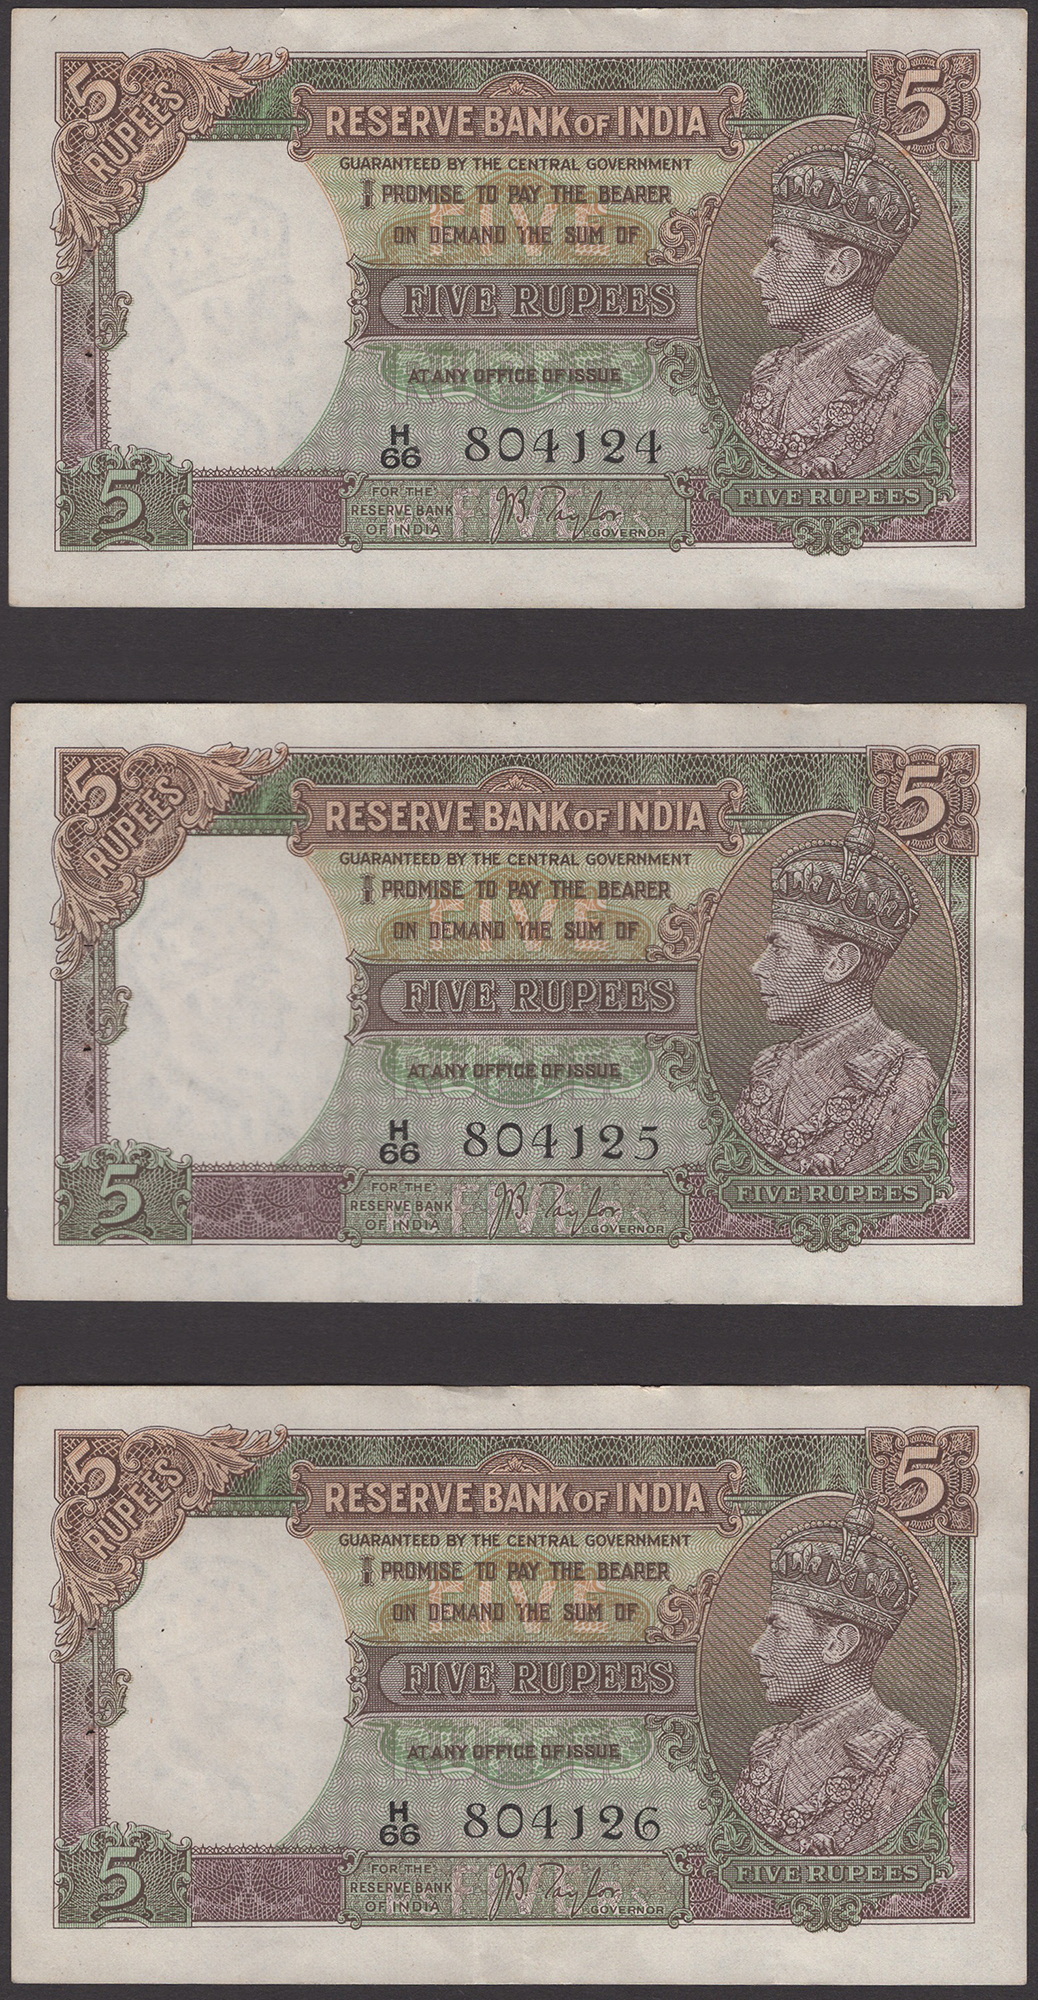 Reserve Bank of India, 5 Rupees (6), ND (1937), consecutive serial numbers H/66 804124-26...